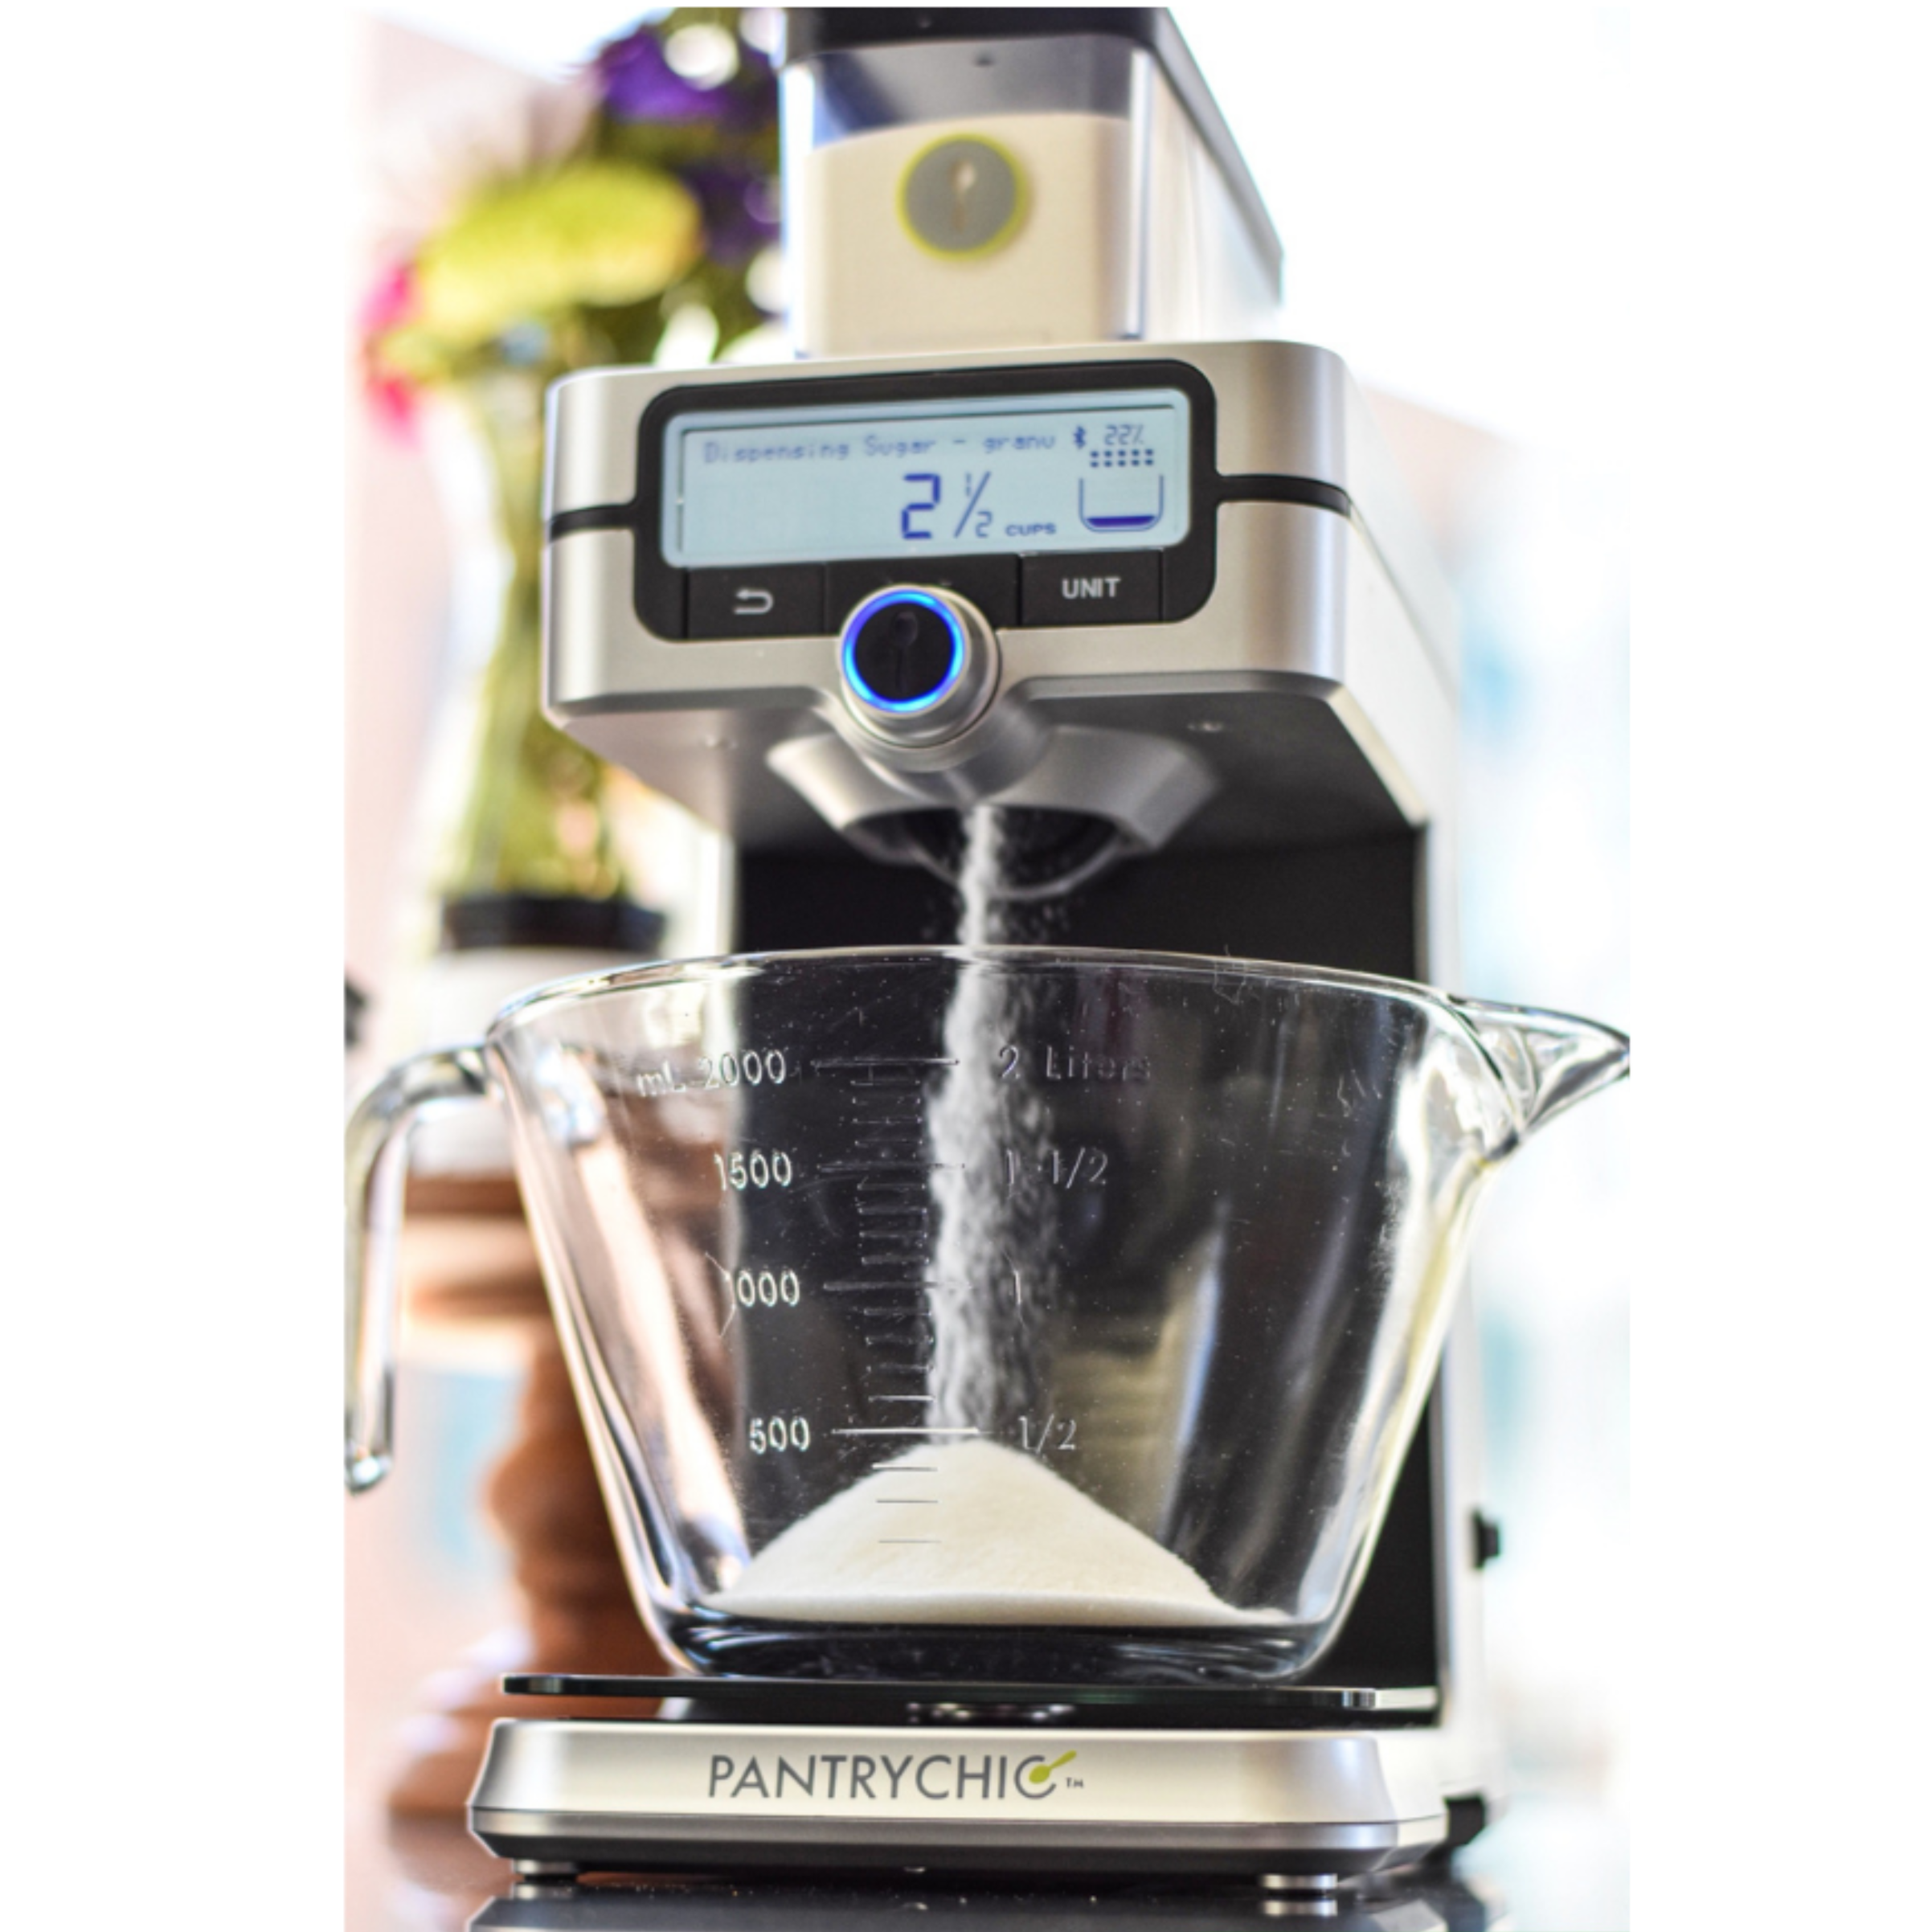 Automatically weigh and dispense ingredients without dispensing more cash  with PantryChic's Prime Day deal